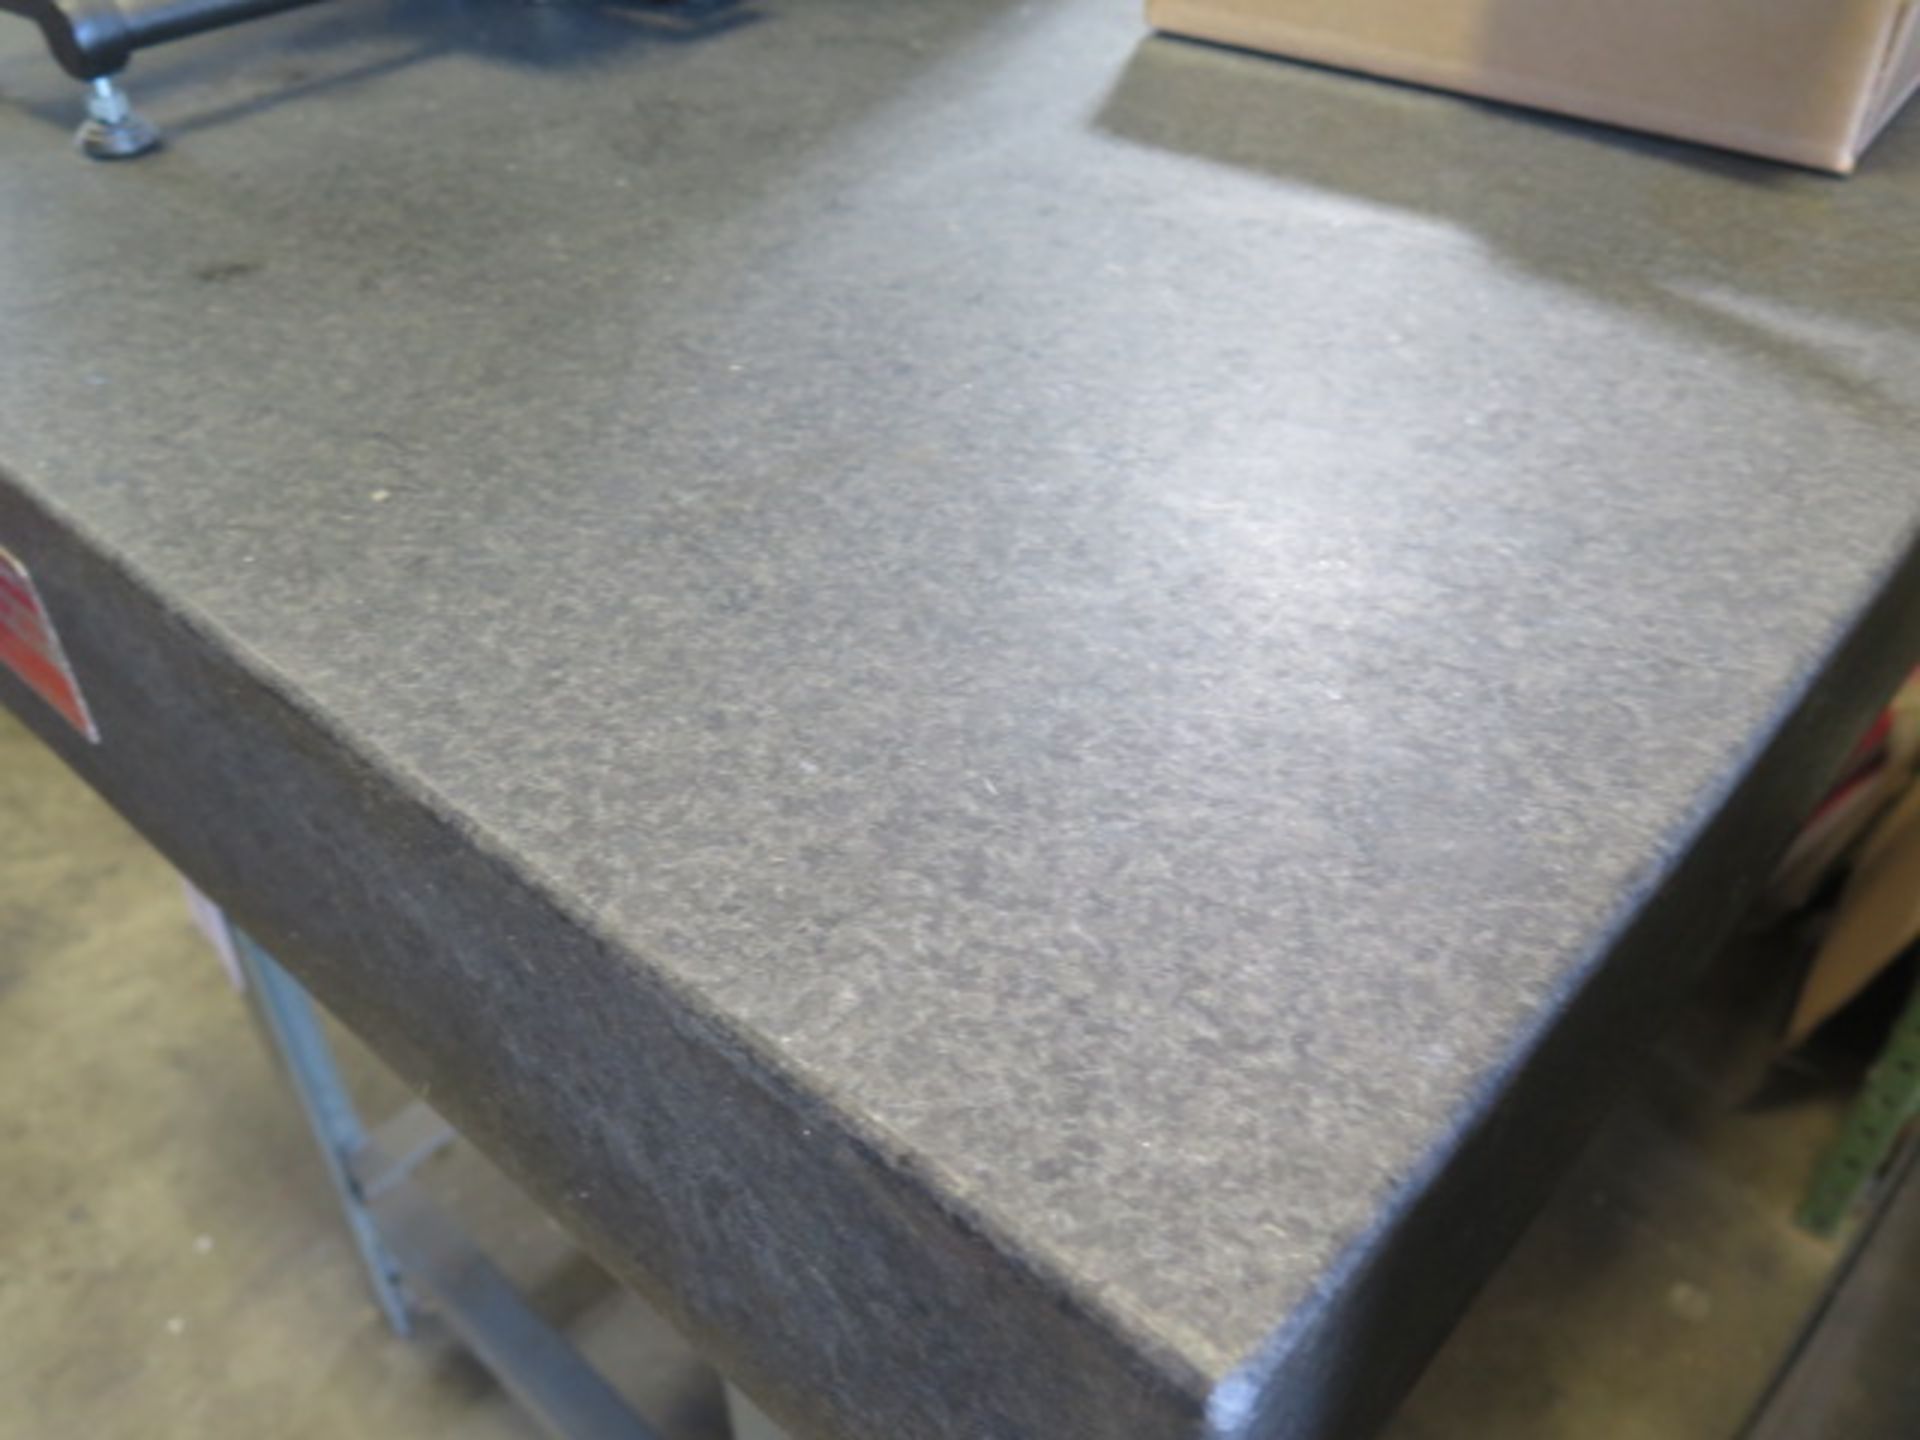 Mitutoyo 36” x 36” x 5 ¼” Granite Surface Plate w/ Stand (SOLD AS-IS – NO WARRANTY) - Image 3 of 4